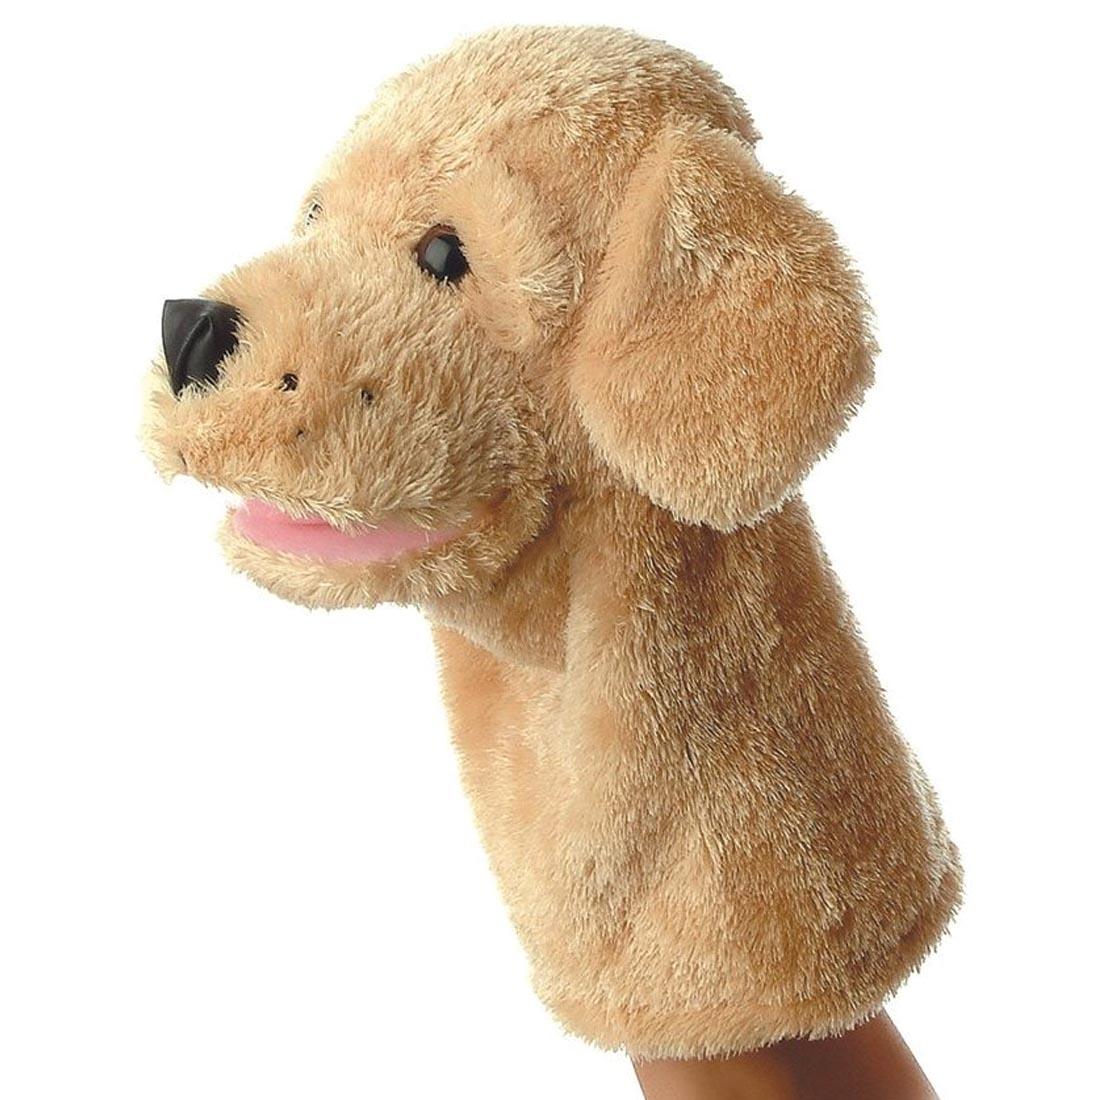 yellow lab-looking dog puppet